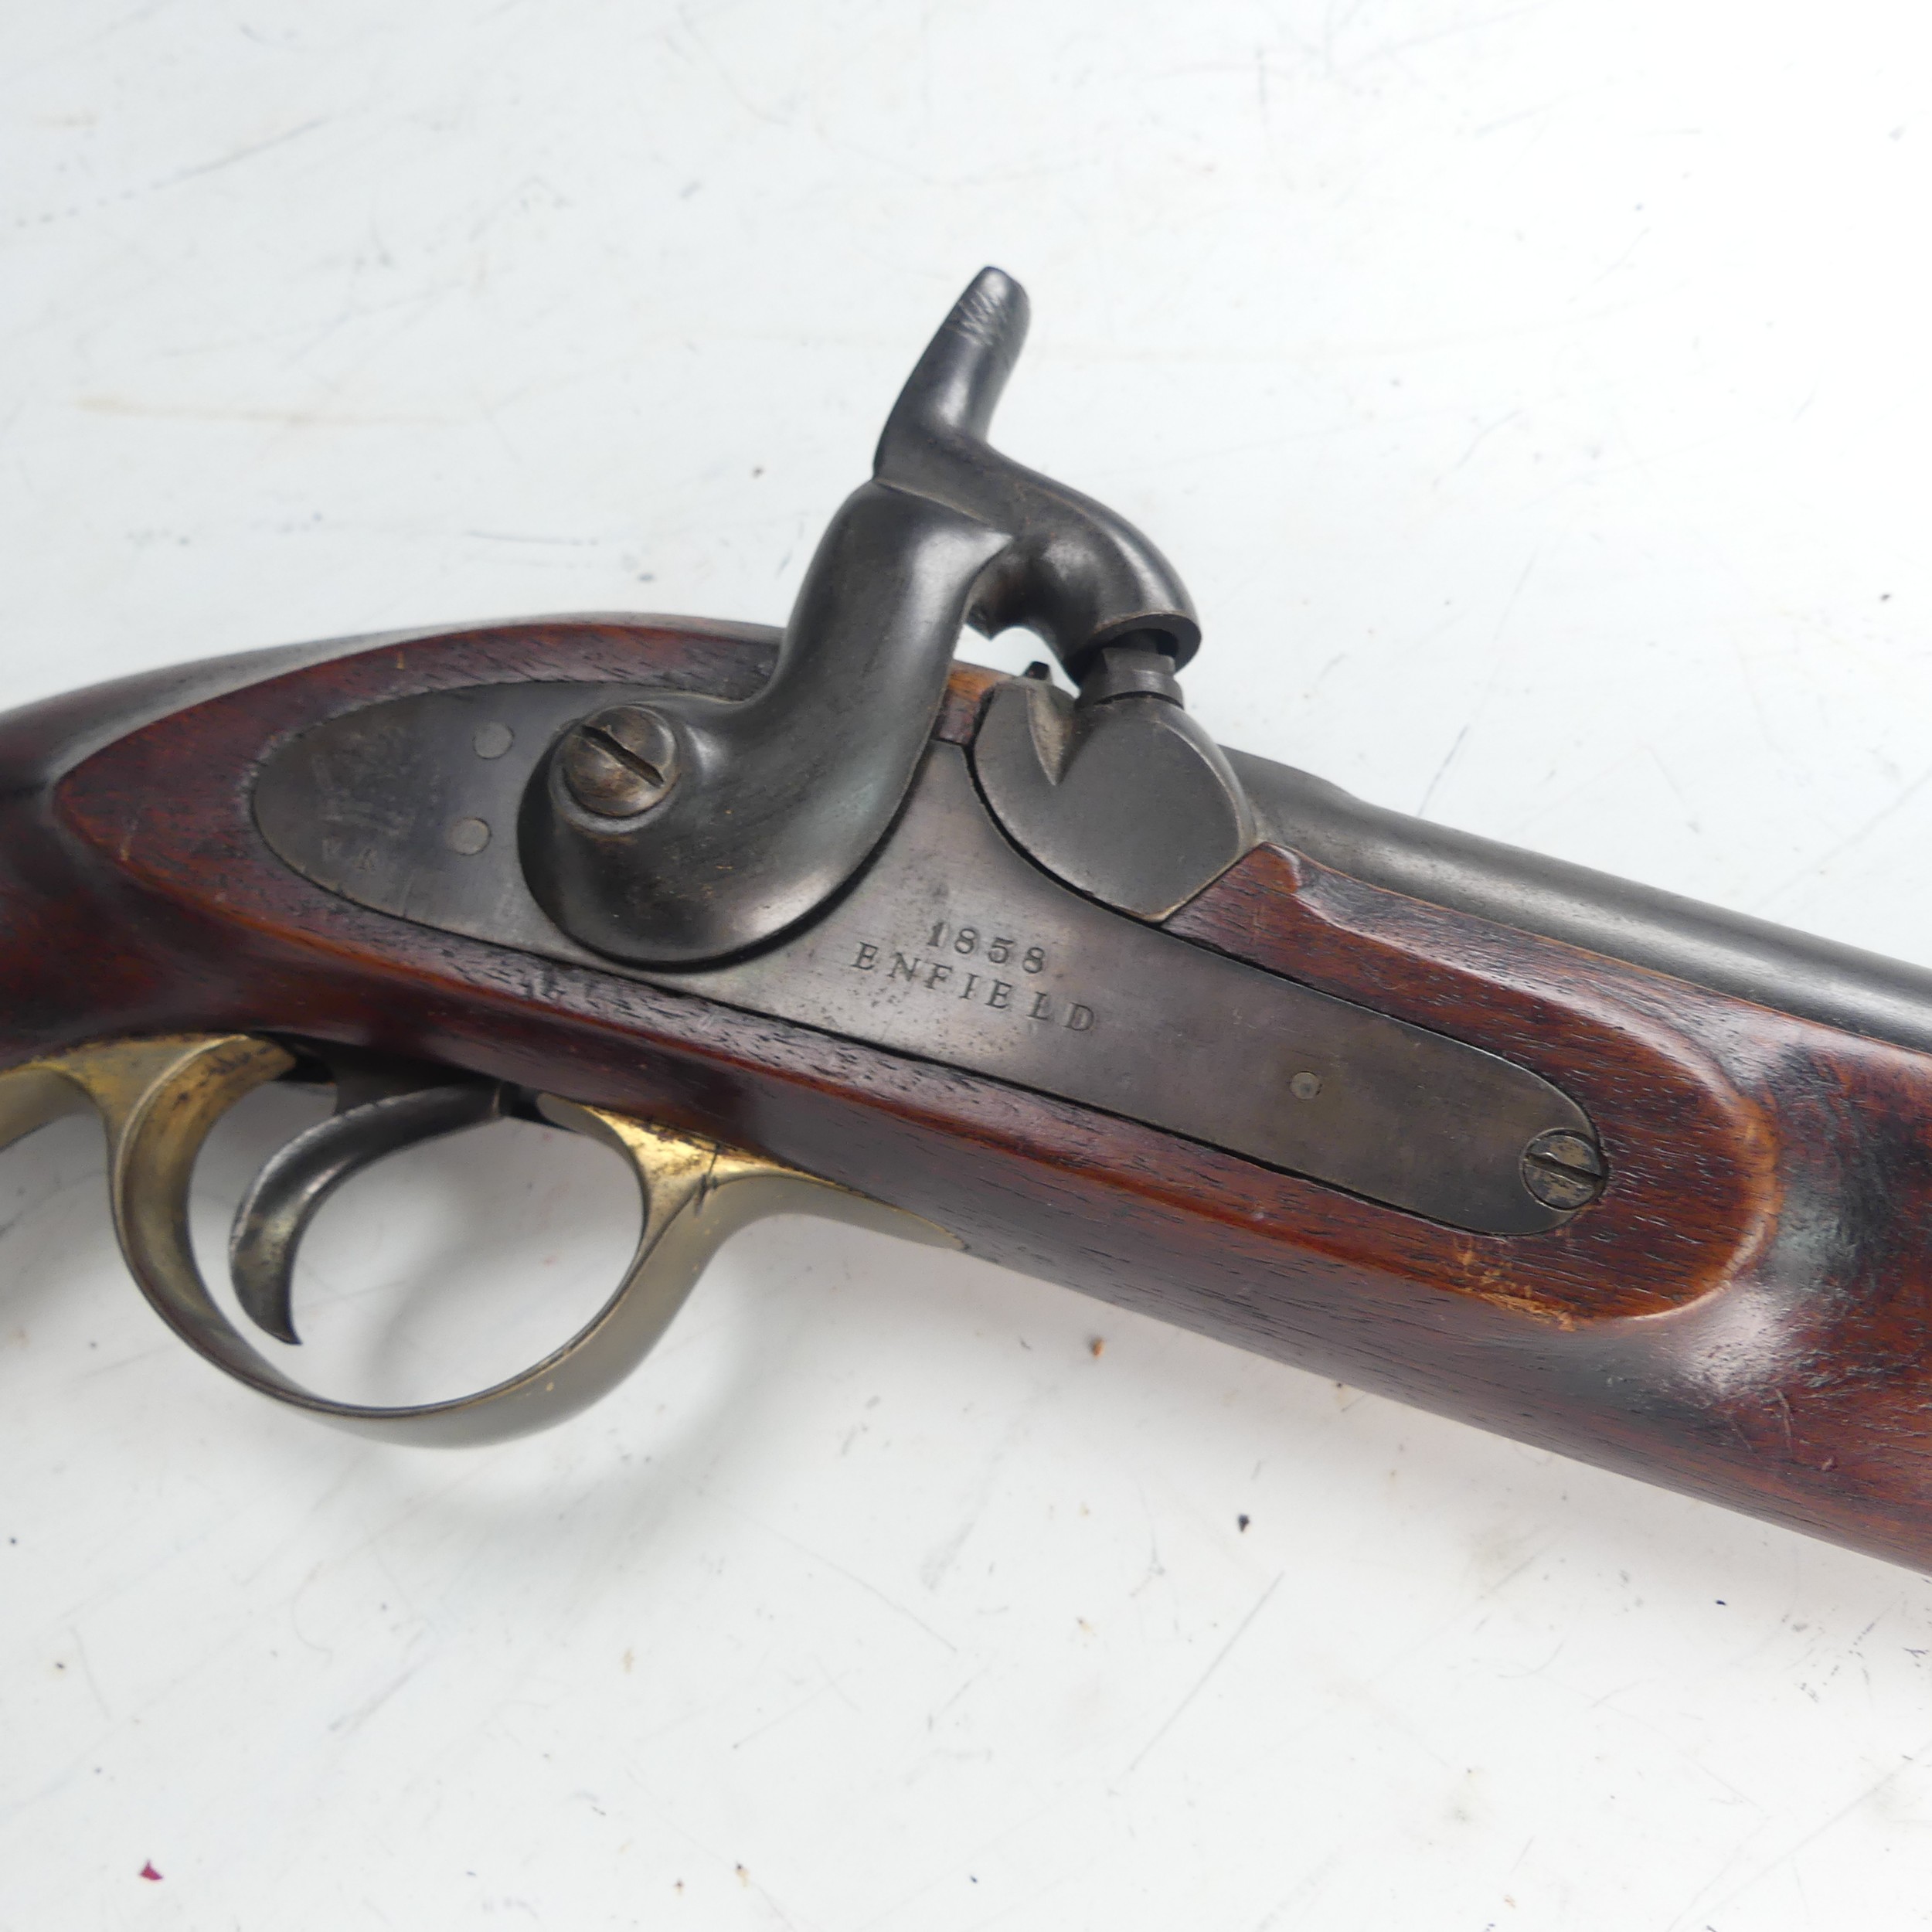 A 19th century 'Enfield' percussion cap service Pistol, with walnut stock, 8 inch steel barrel, - Image 5 of 7